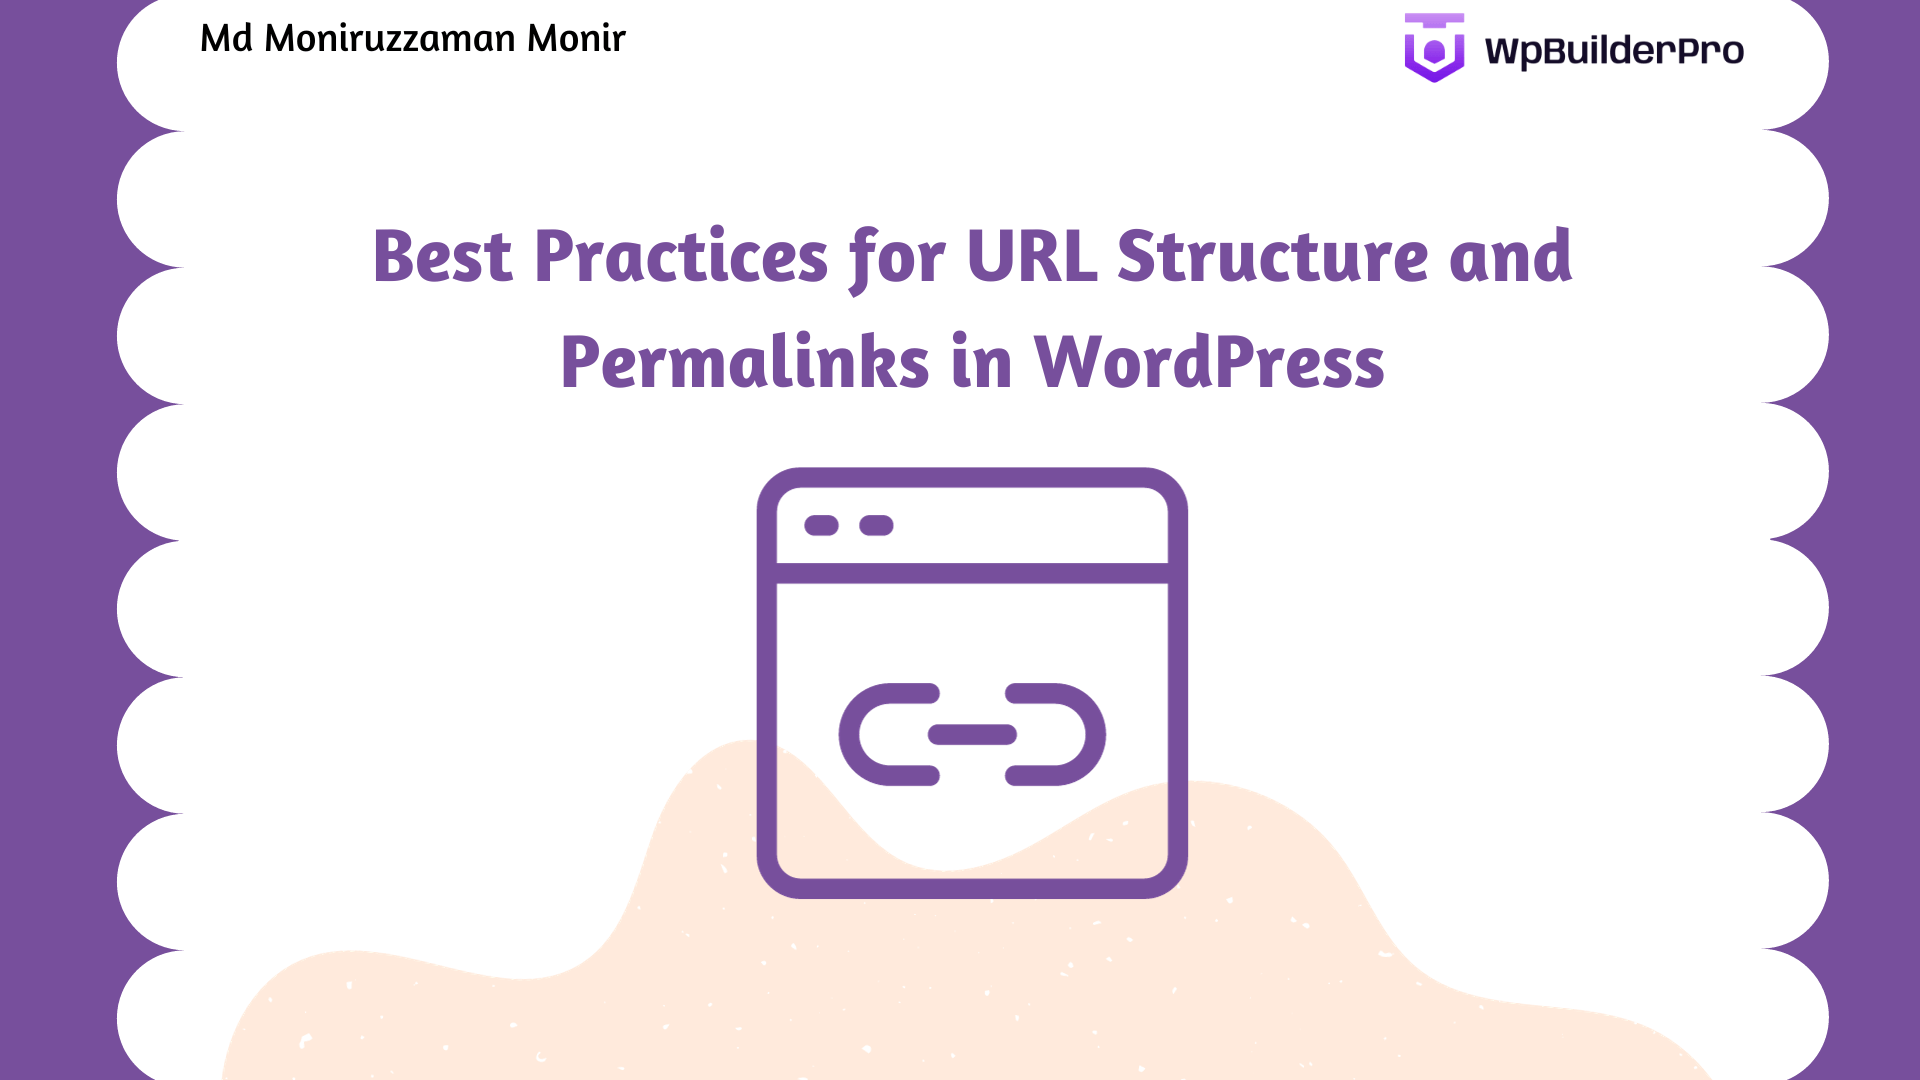 Best Practices for URL Structure and Permalinks in WordPress